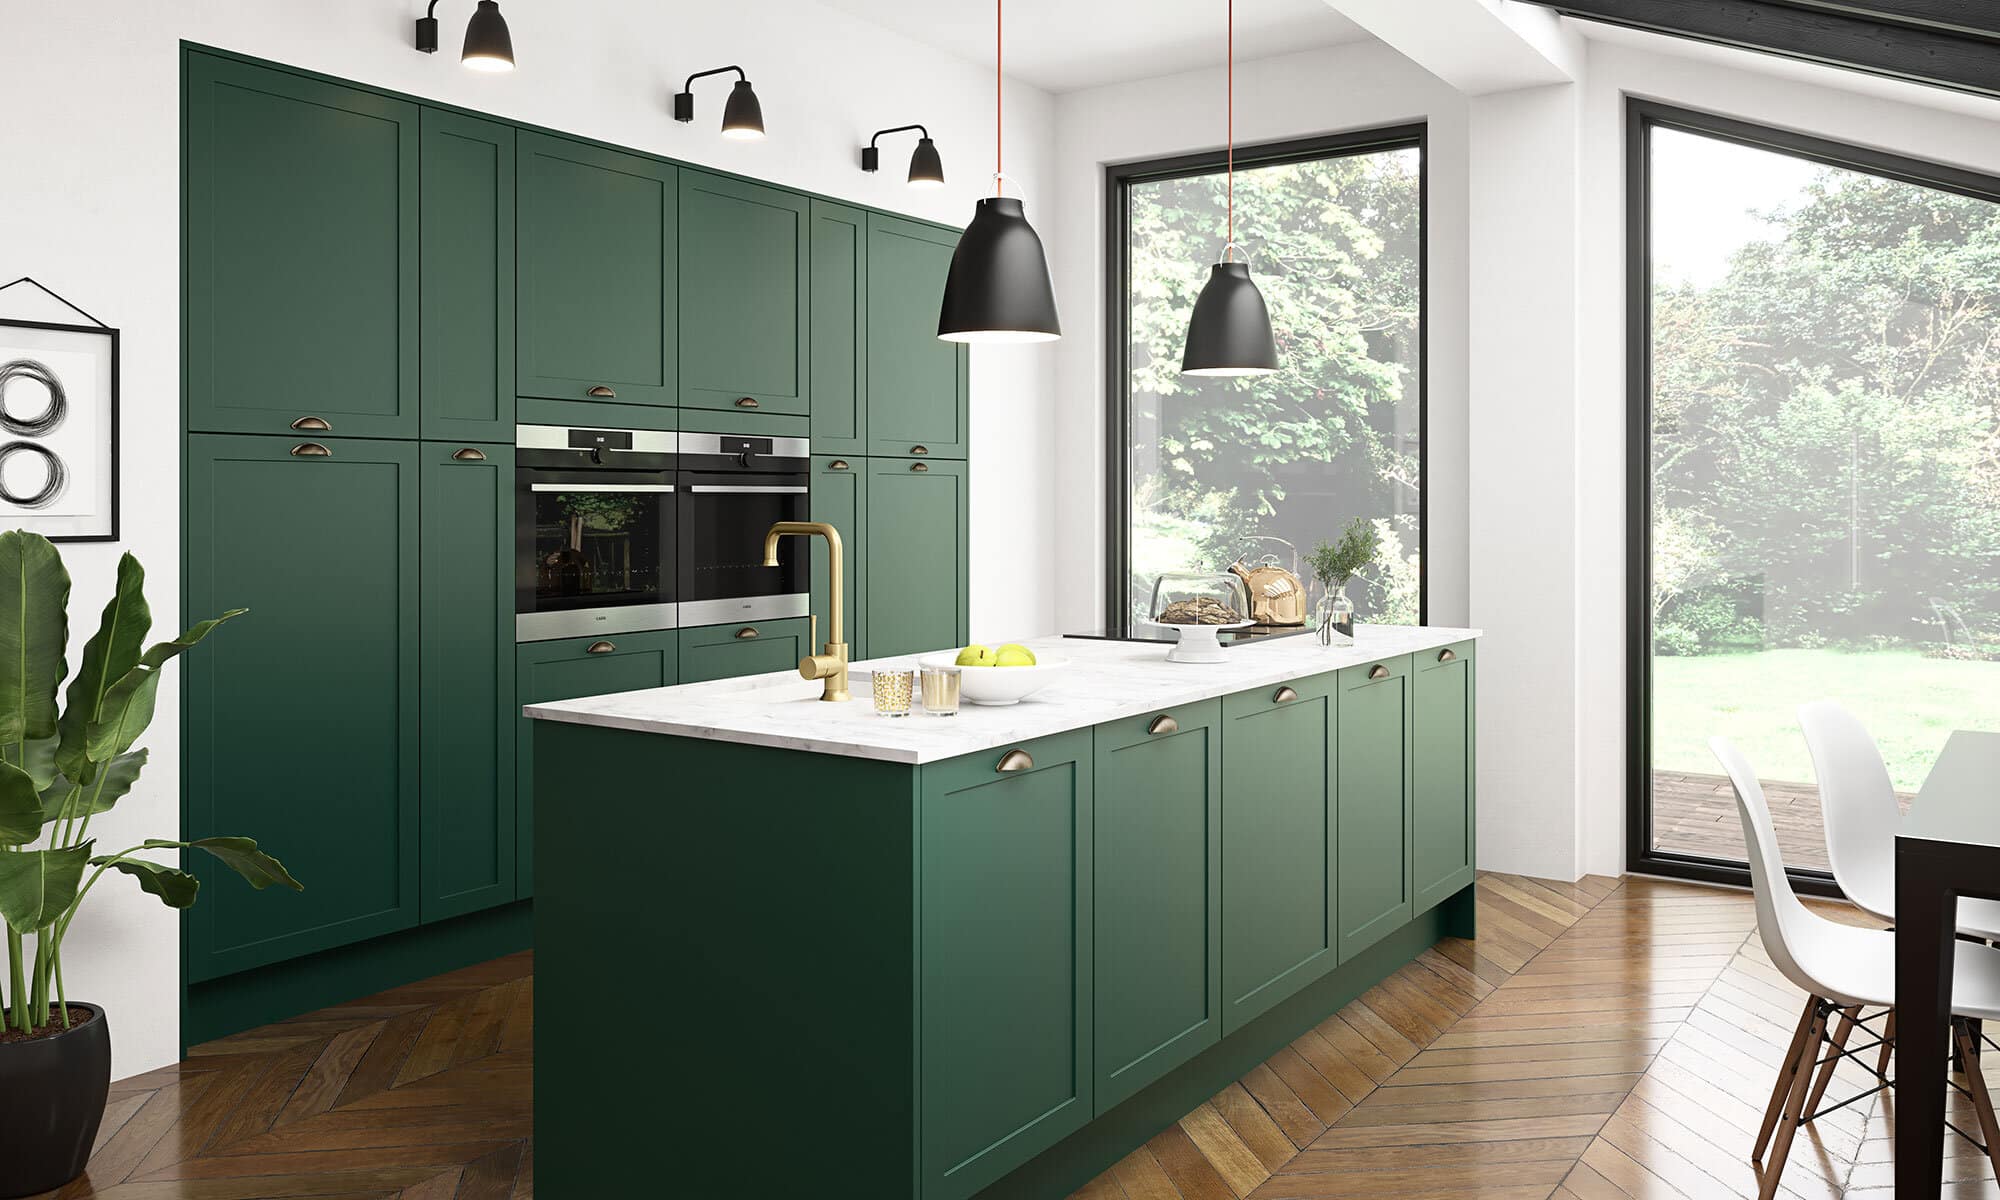 Modern kitchen with green cabinets and white countertops.